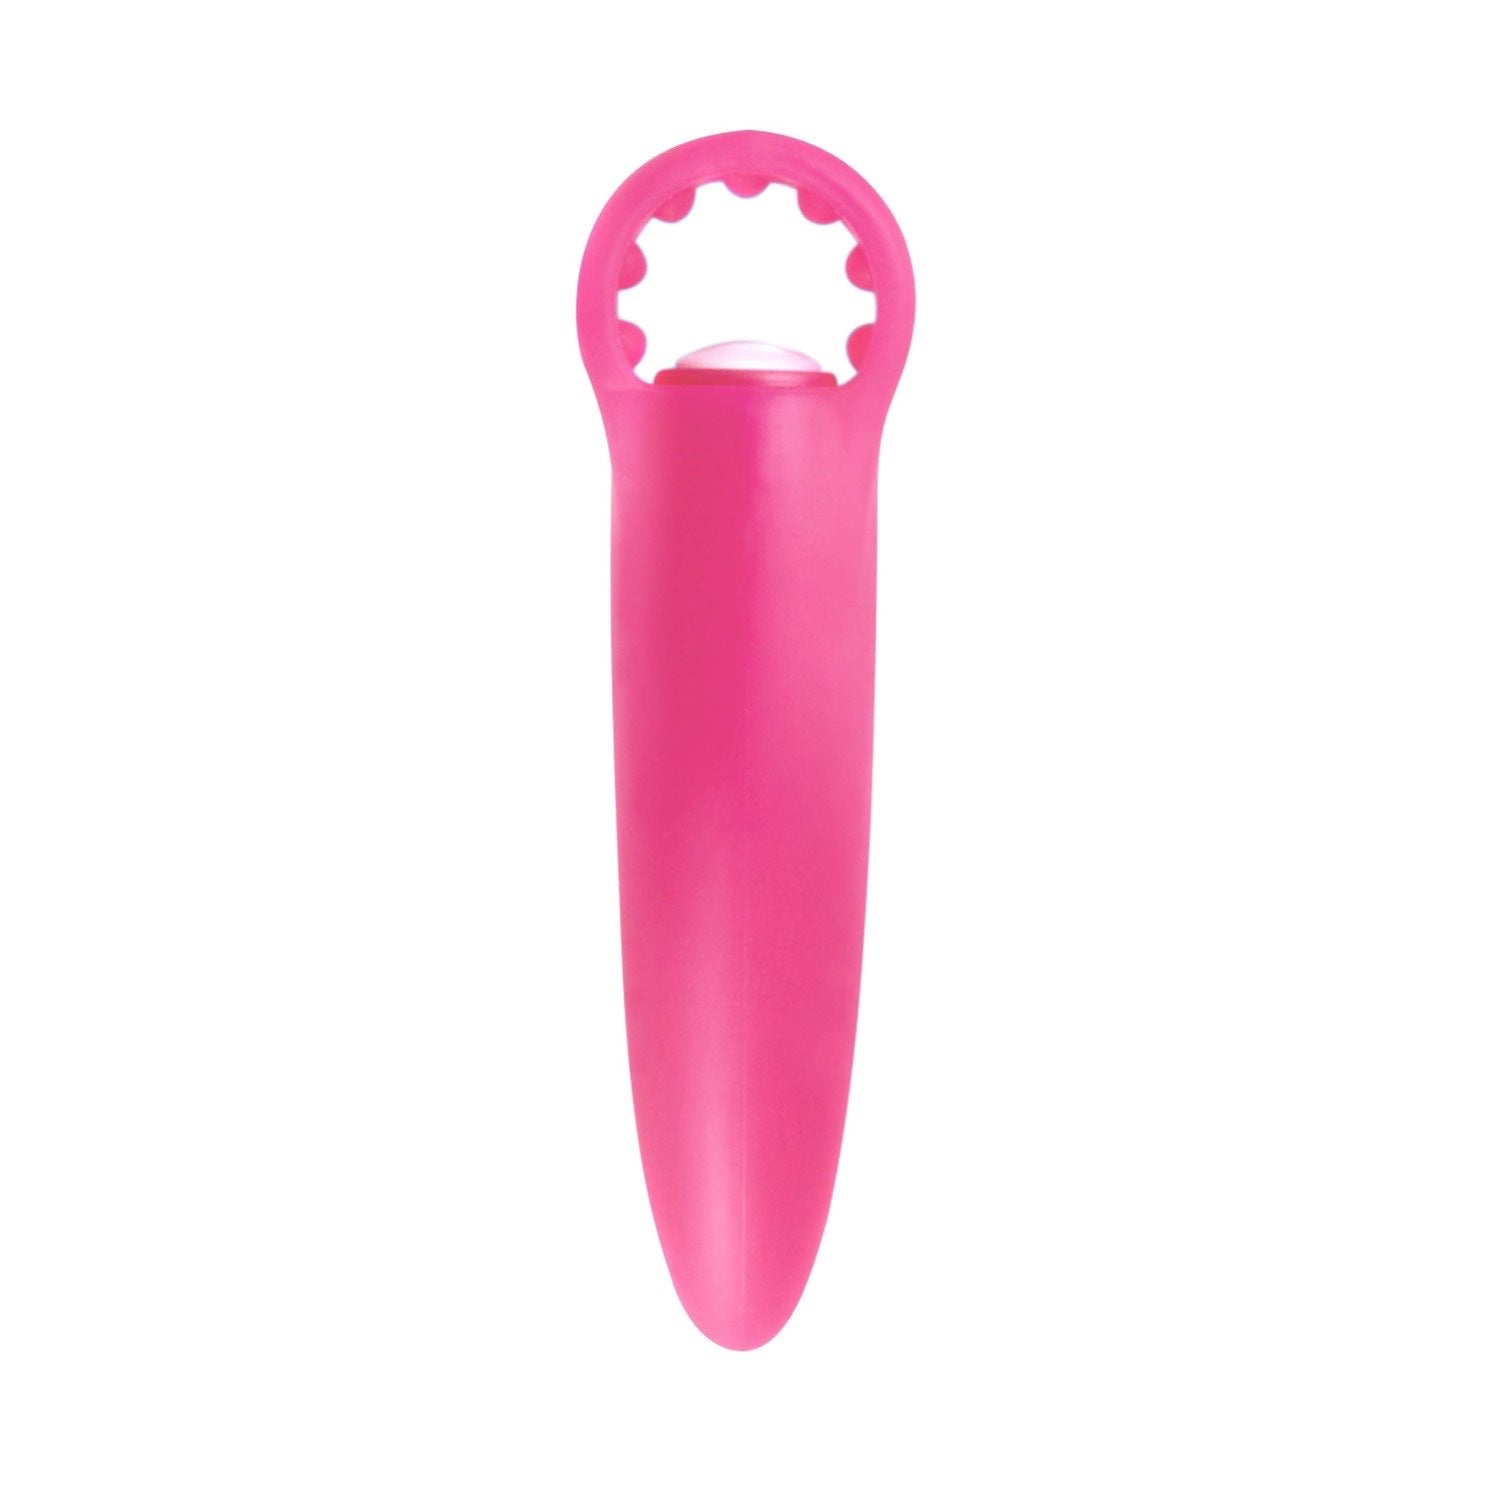  Neon Lil&#39; Finger Vibe - Pink 8.3 cm (3.25&quot;) Stimulator by Pipedream